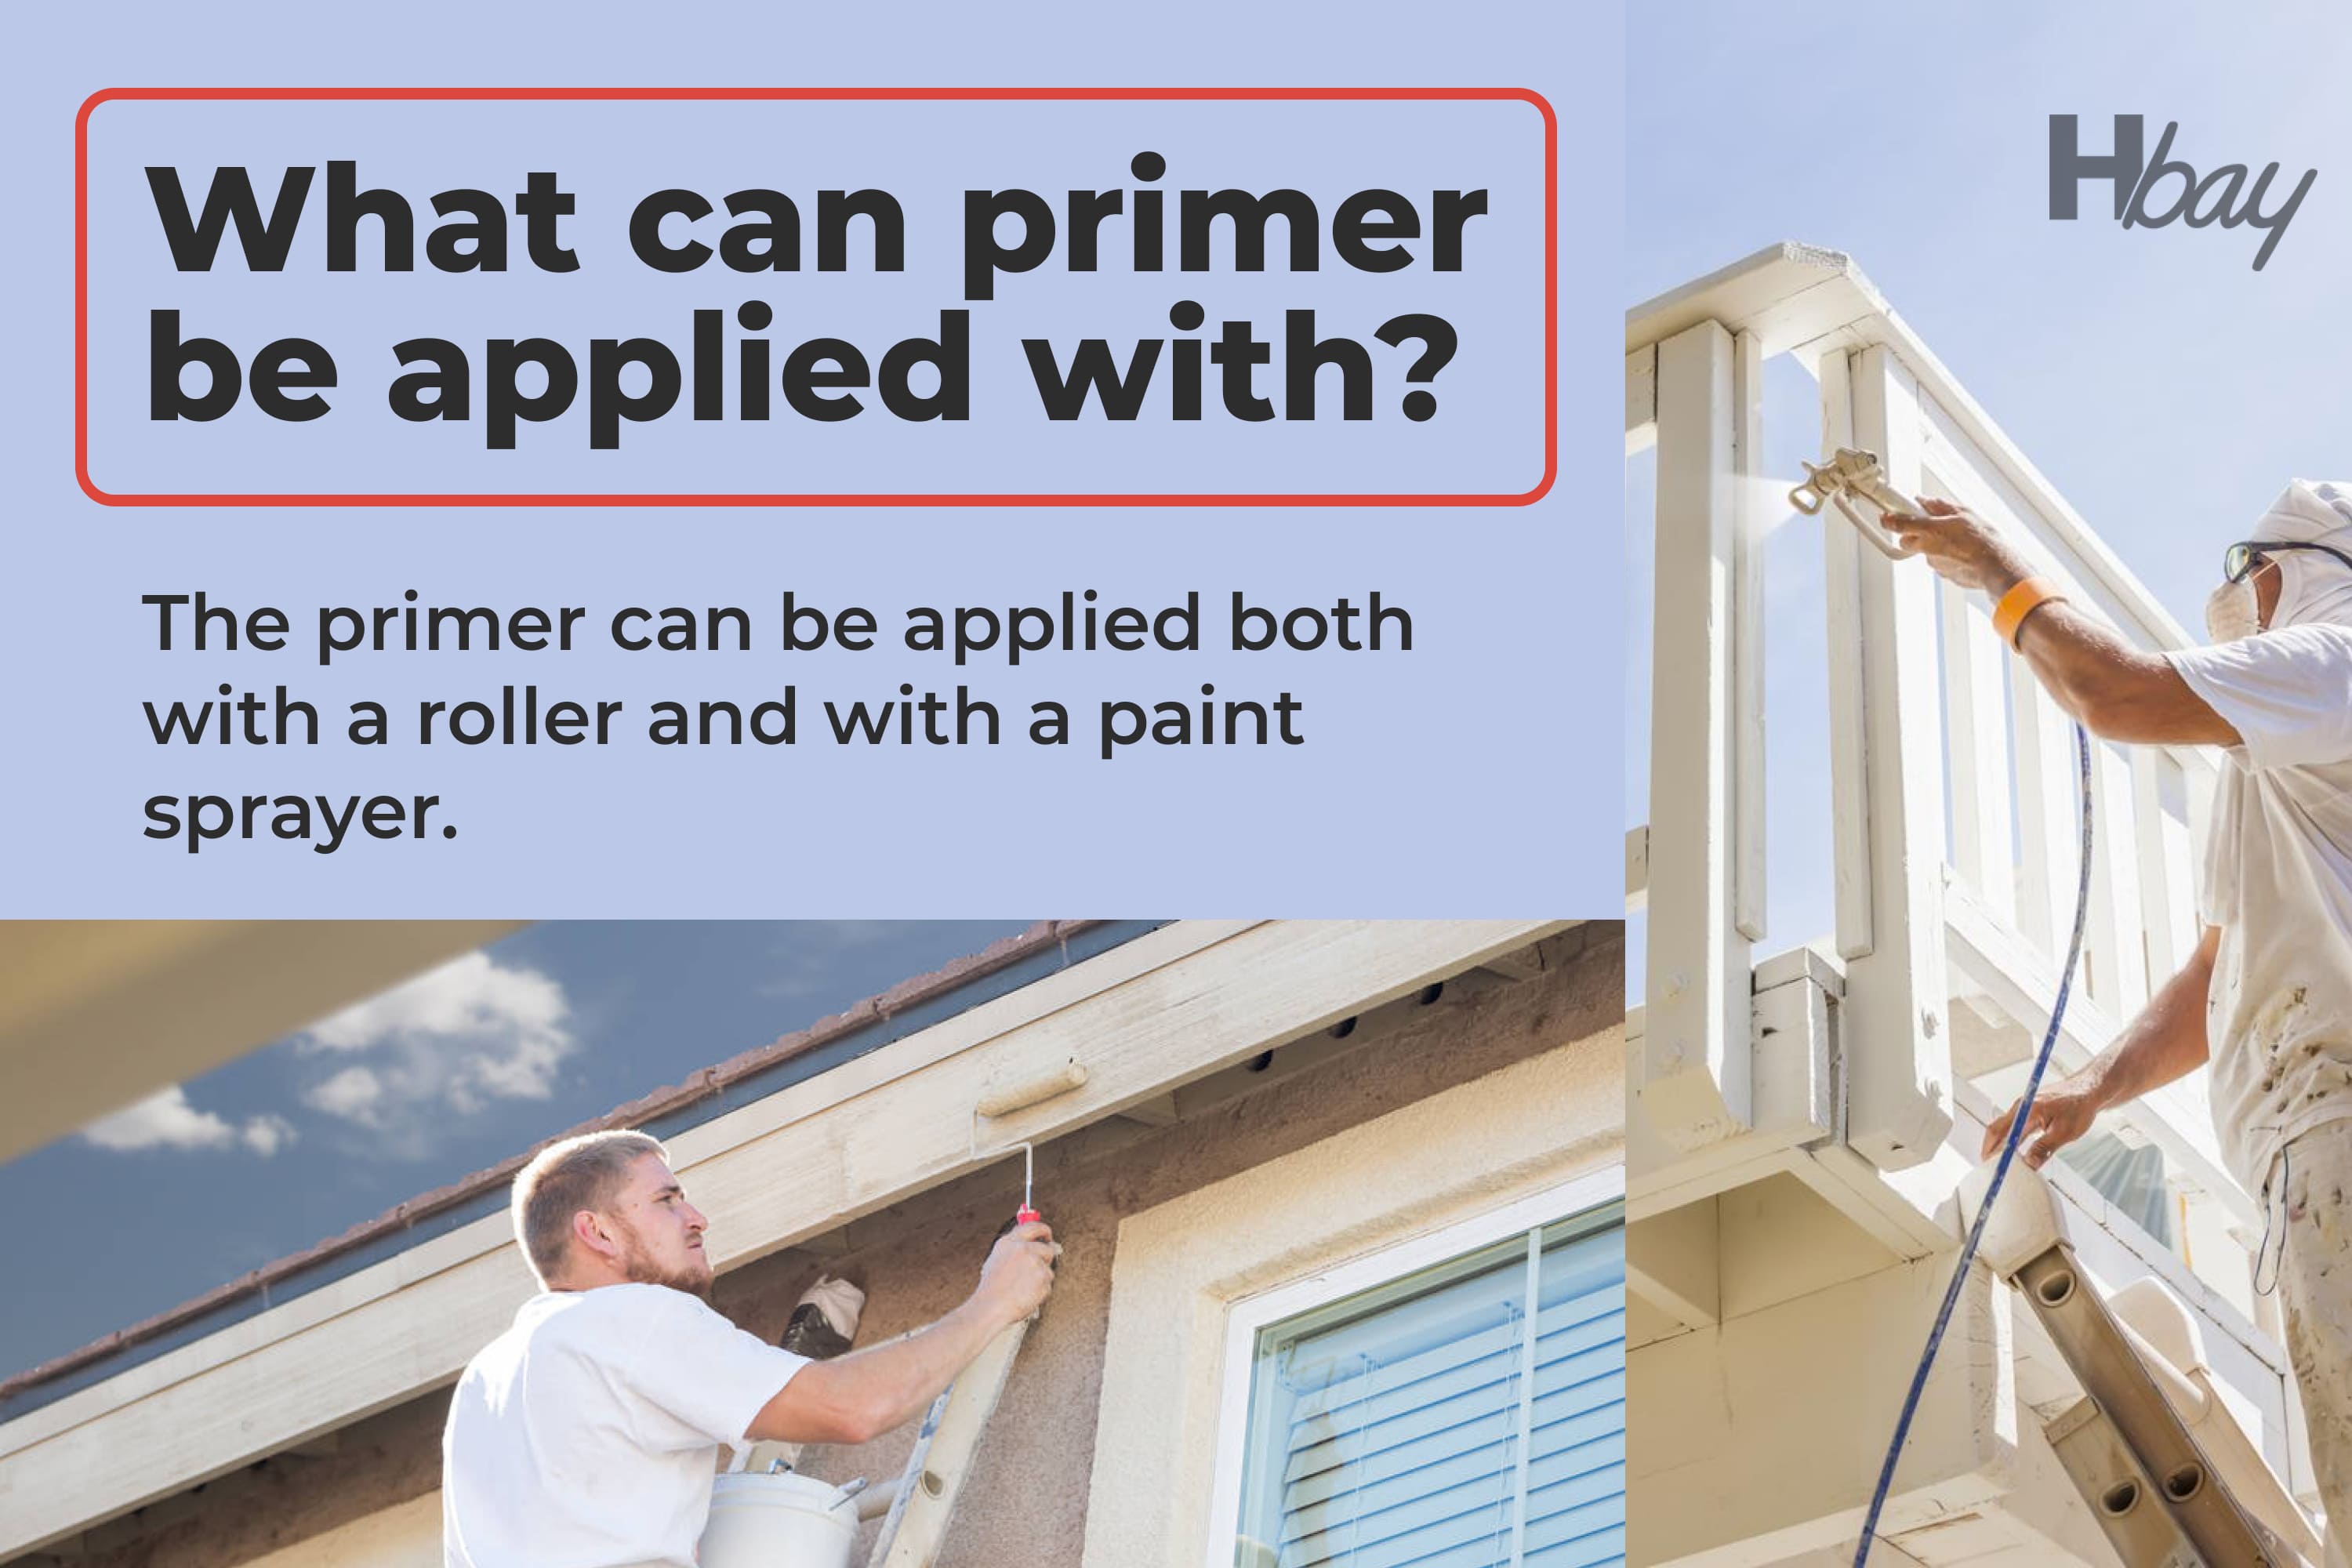 What can primer be applied with